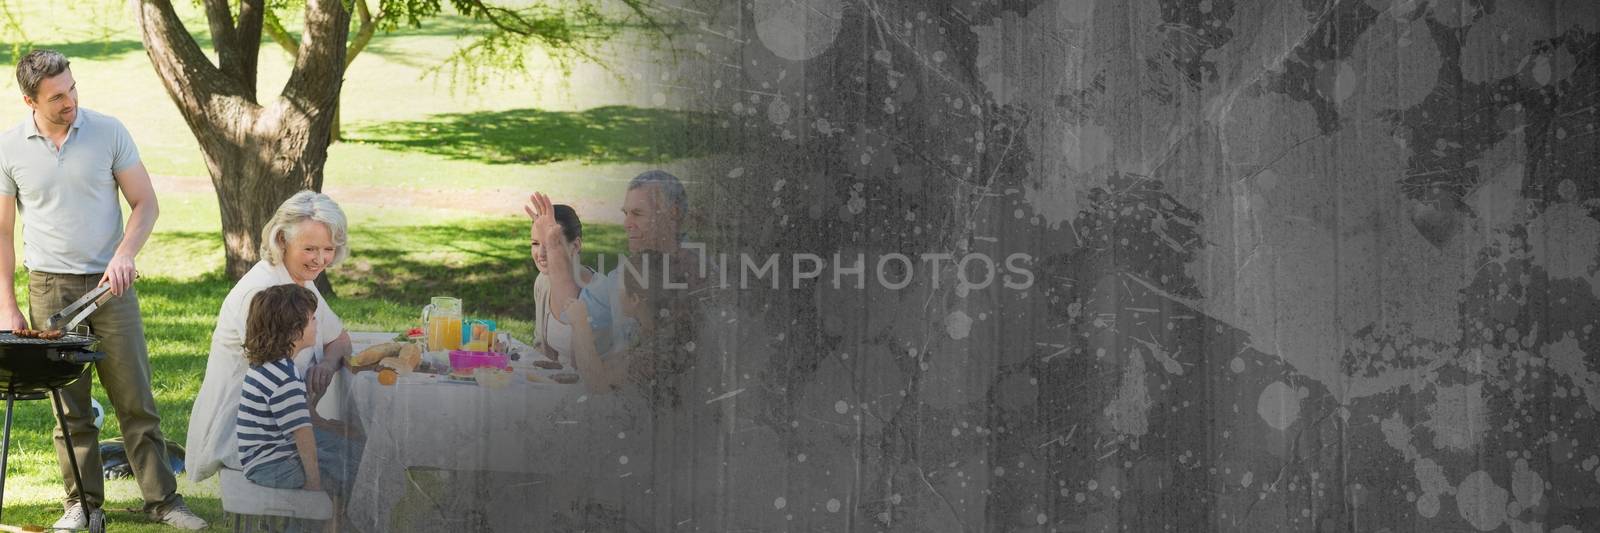 Digital composite of Family at table and bbq with grey cardboard transition